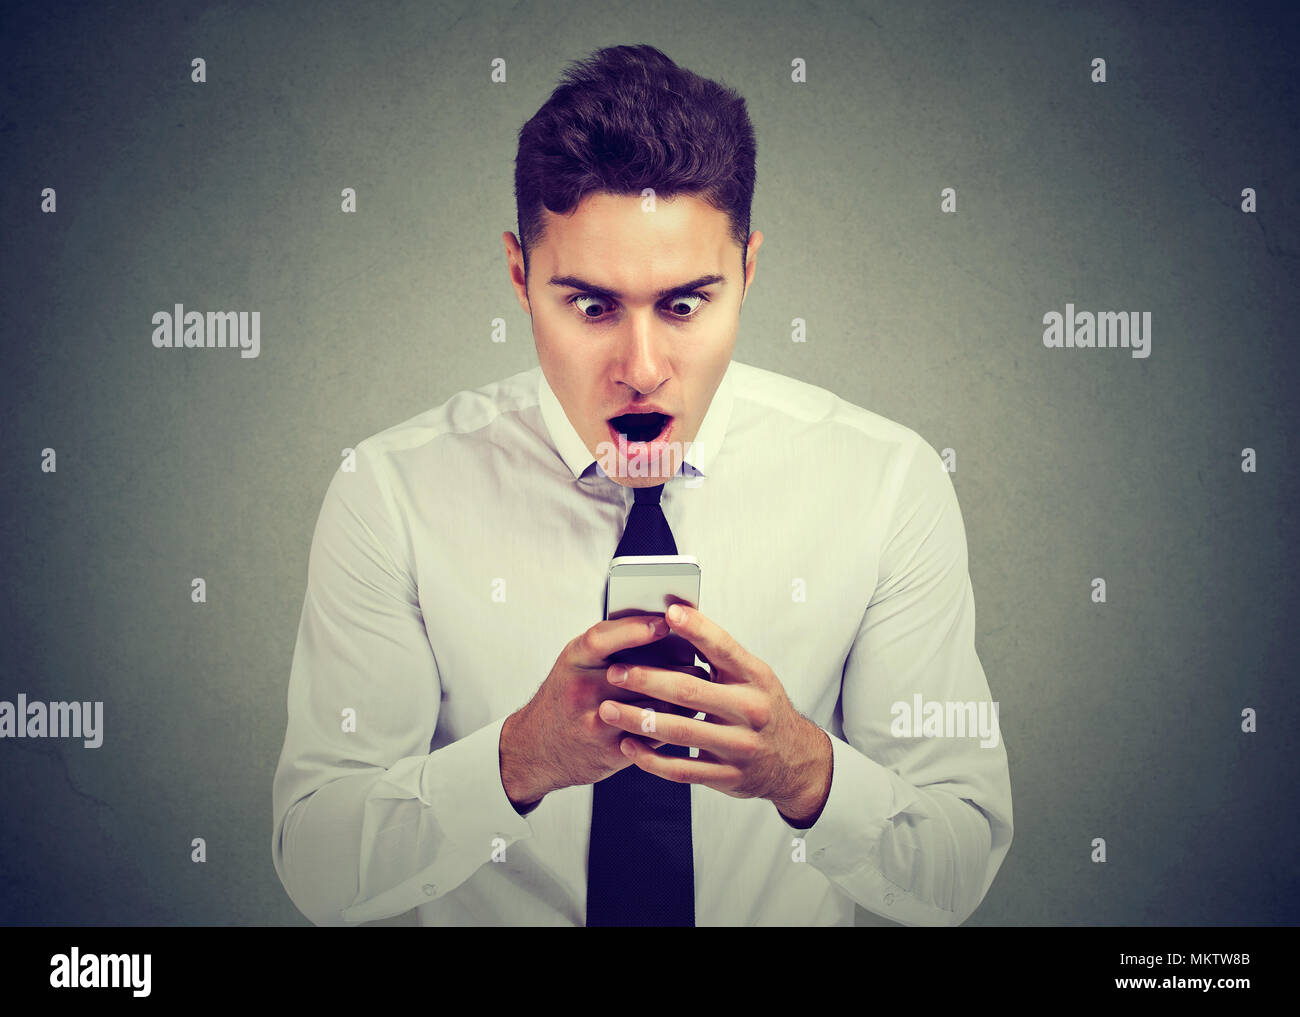 Closeup portrait surprised man looking at phone seeing unexpected news or photos with wonder emotion on face Stock Photo